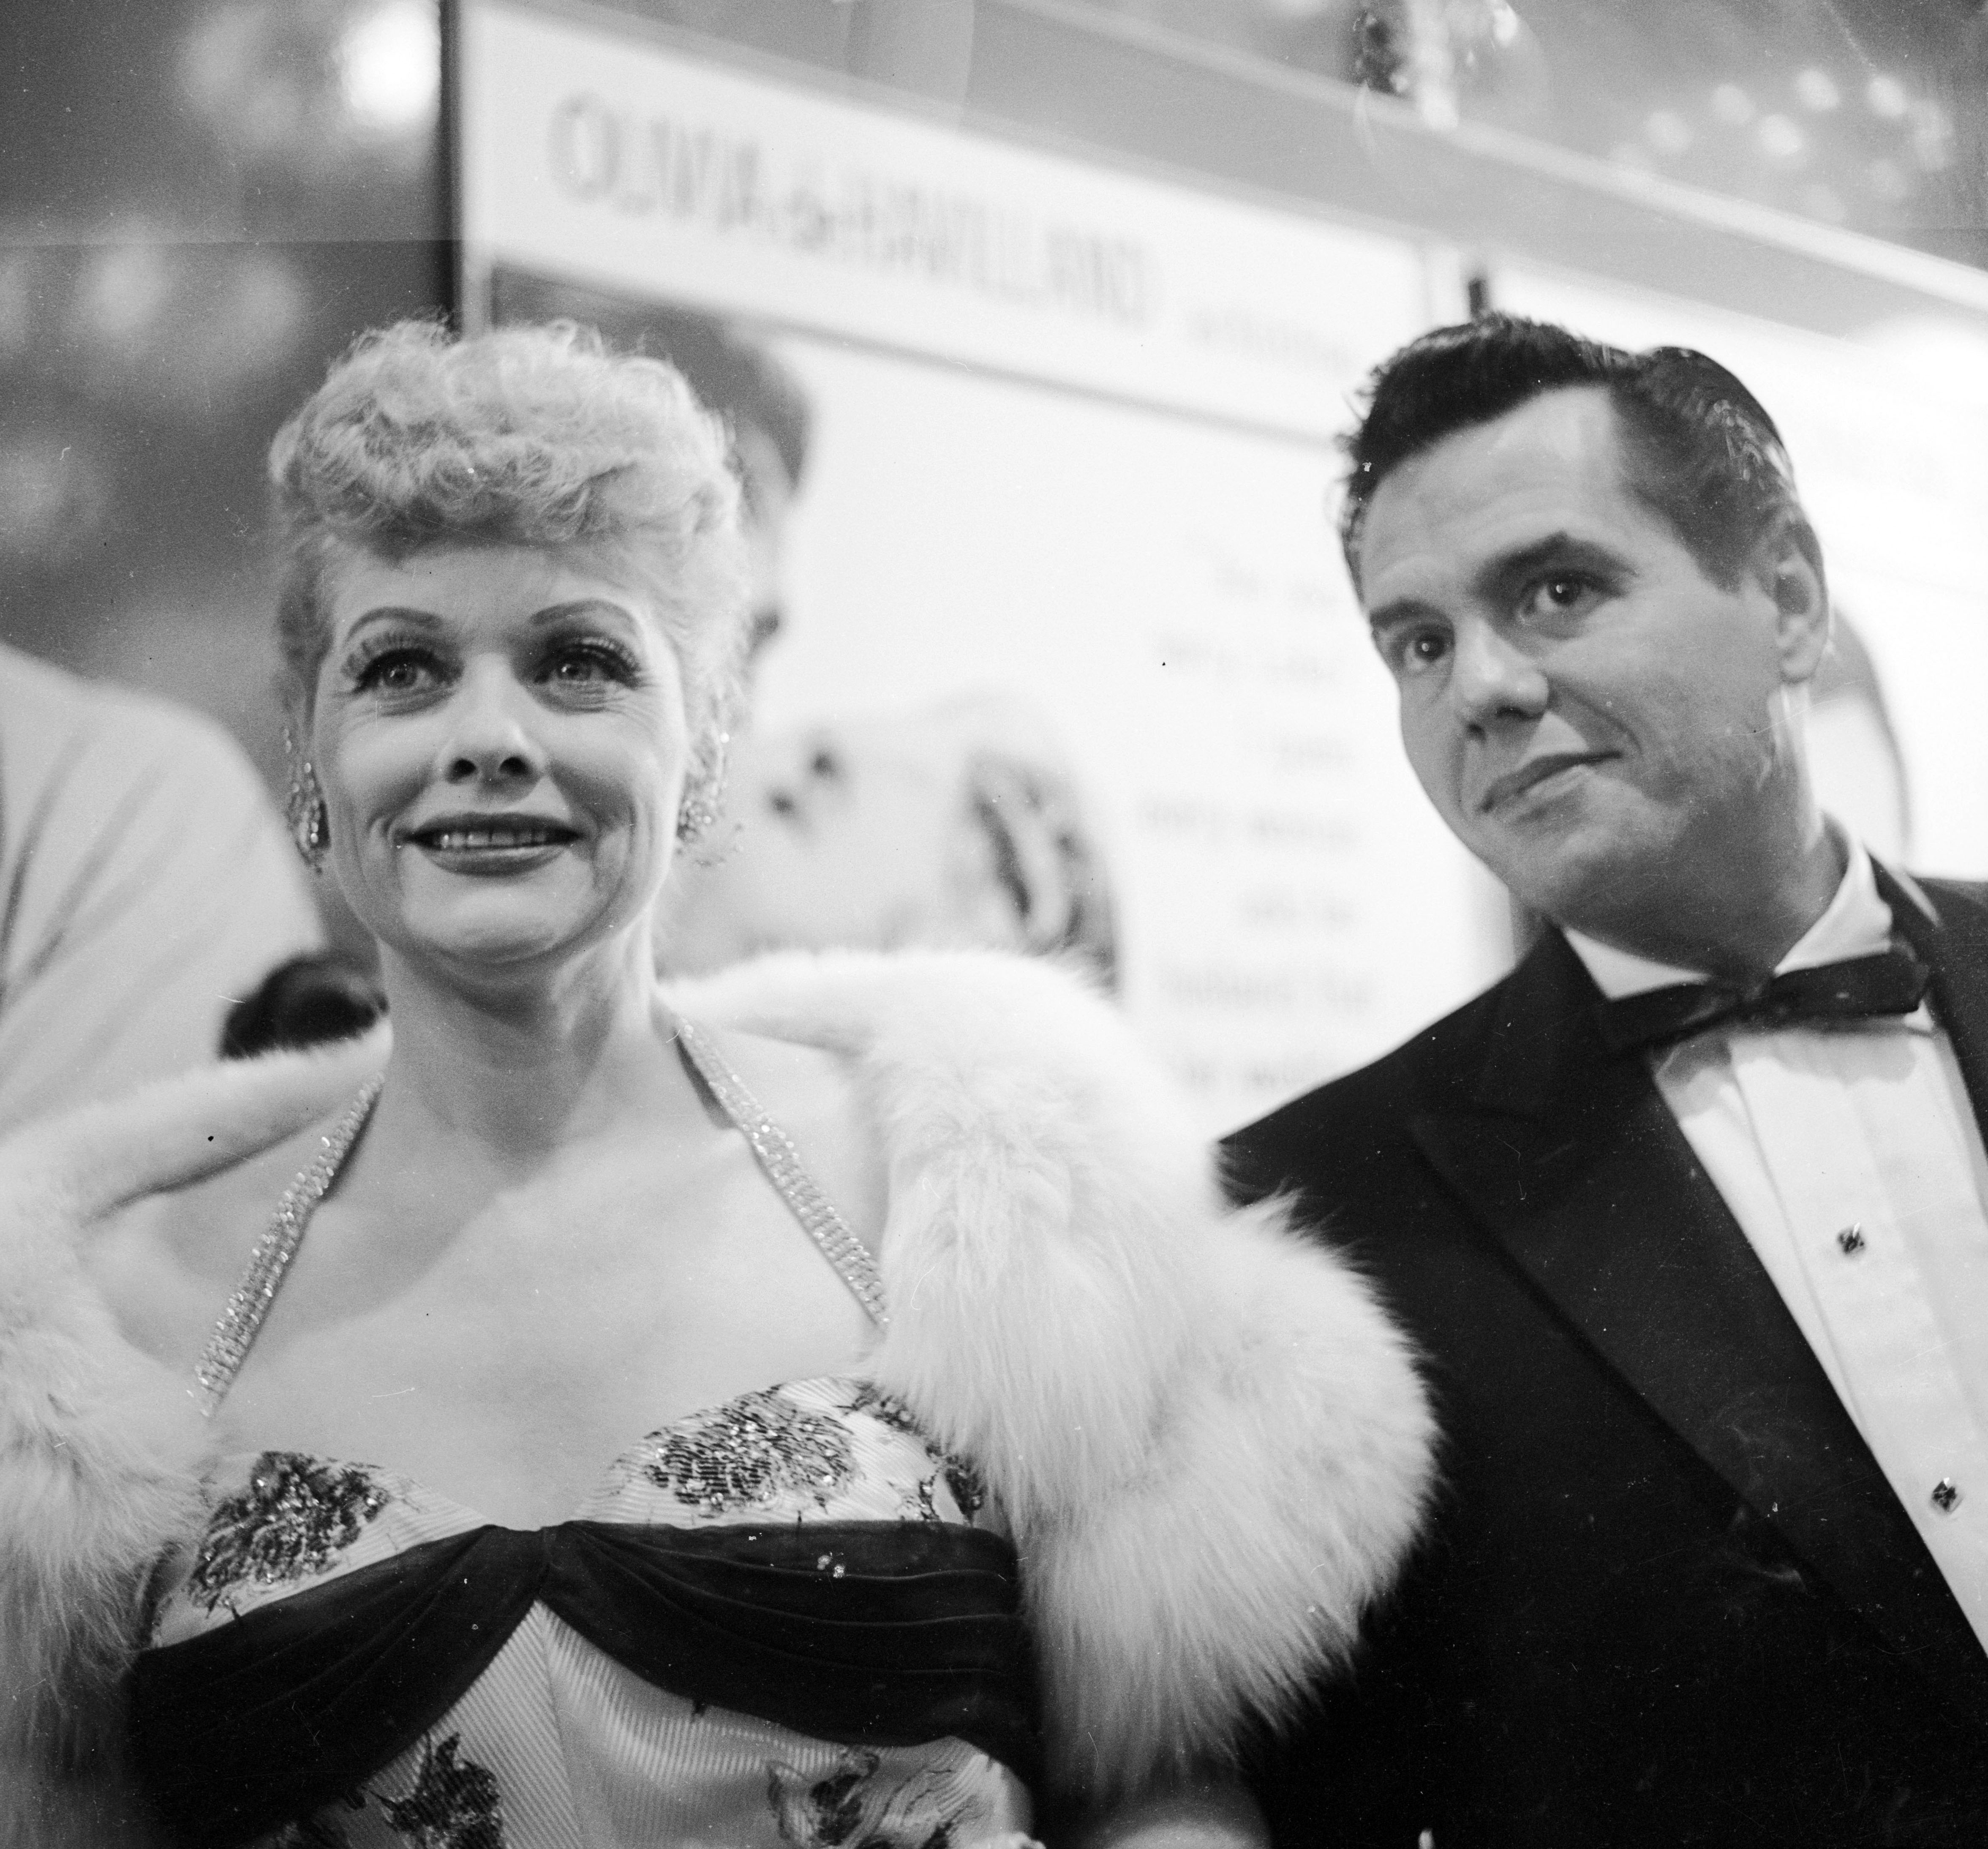 'I Love Lucy' stars Lucille Ball and her husband Desi Arnaz arrive at a CBS party in honor of Johnny Carson